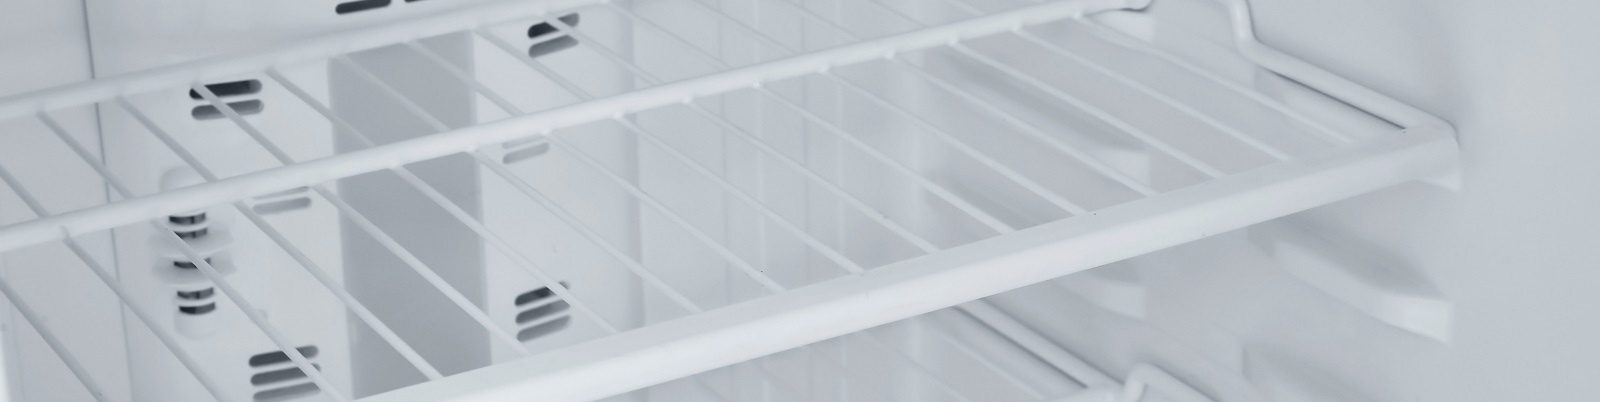 Plascoat NG thermoplastic powder coatings for refrigerator shelves